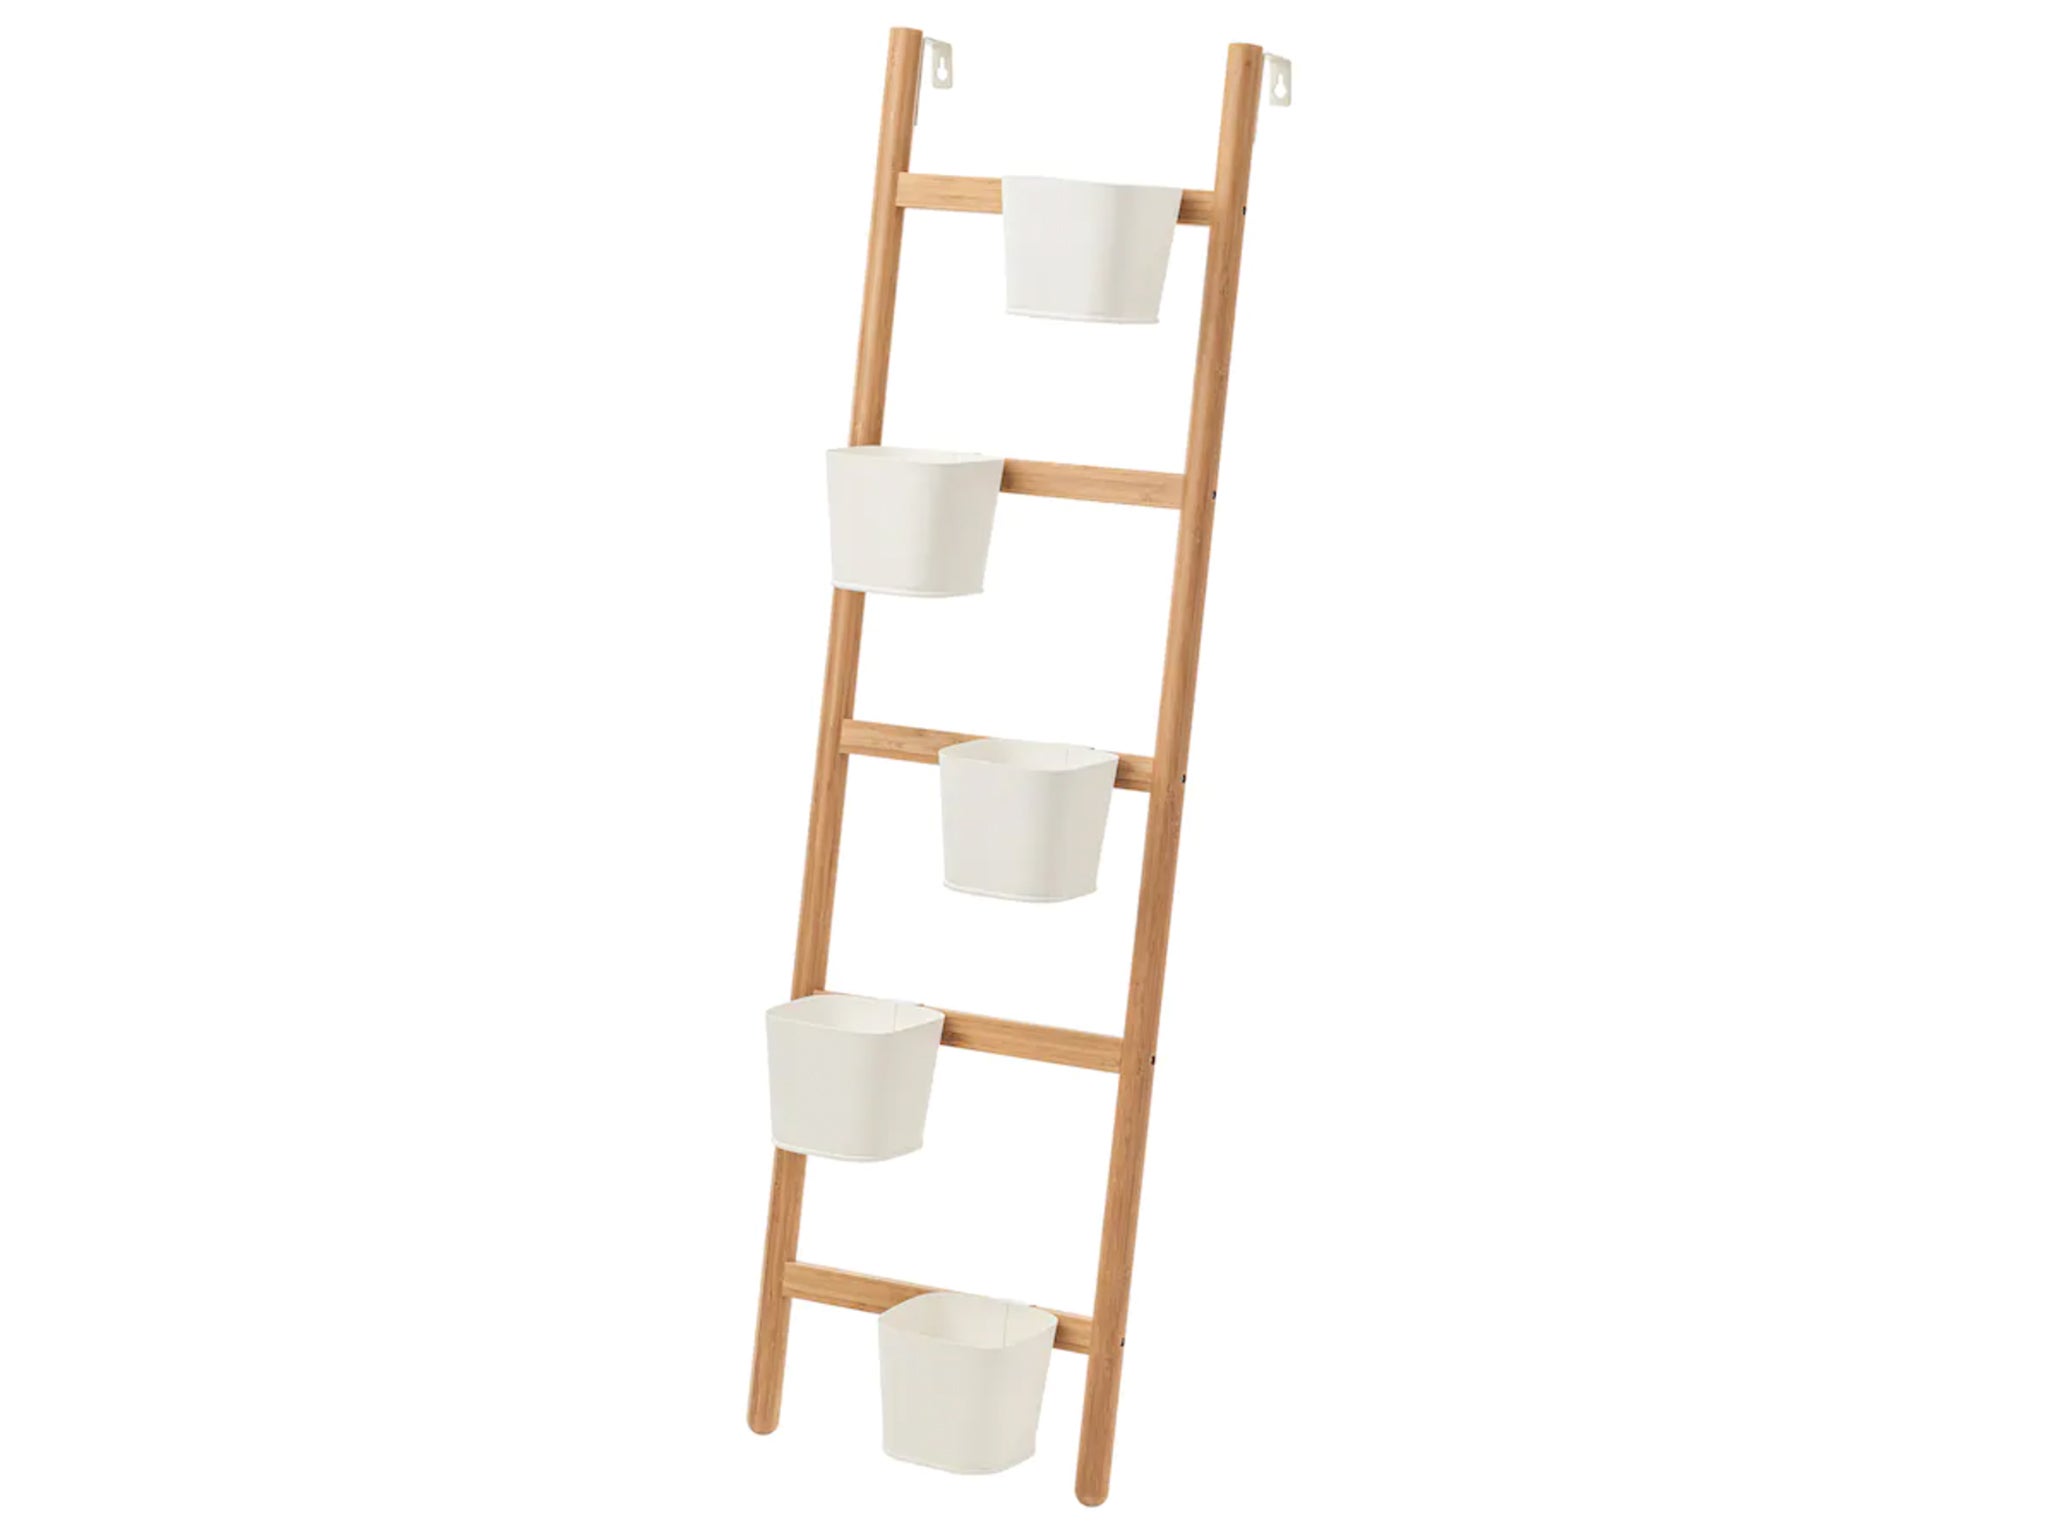 A vertical plant stand will free up floor space which is great if you're limited on room